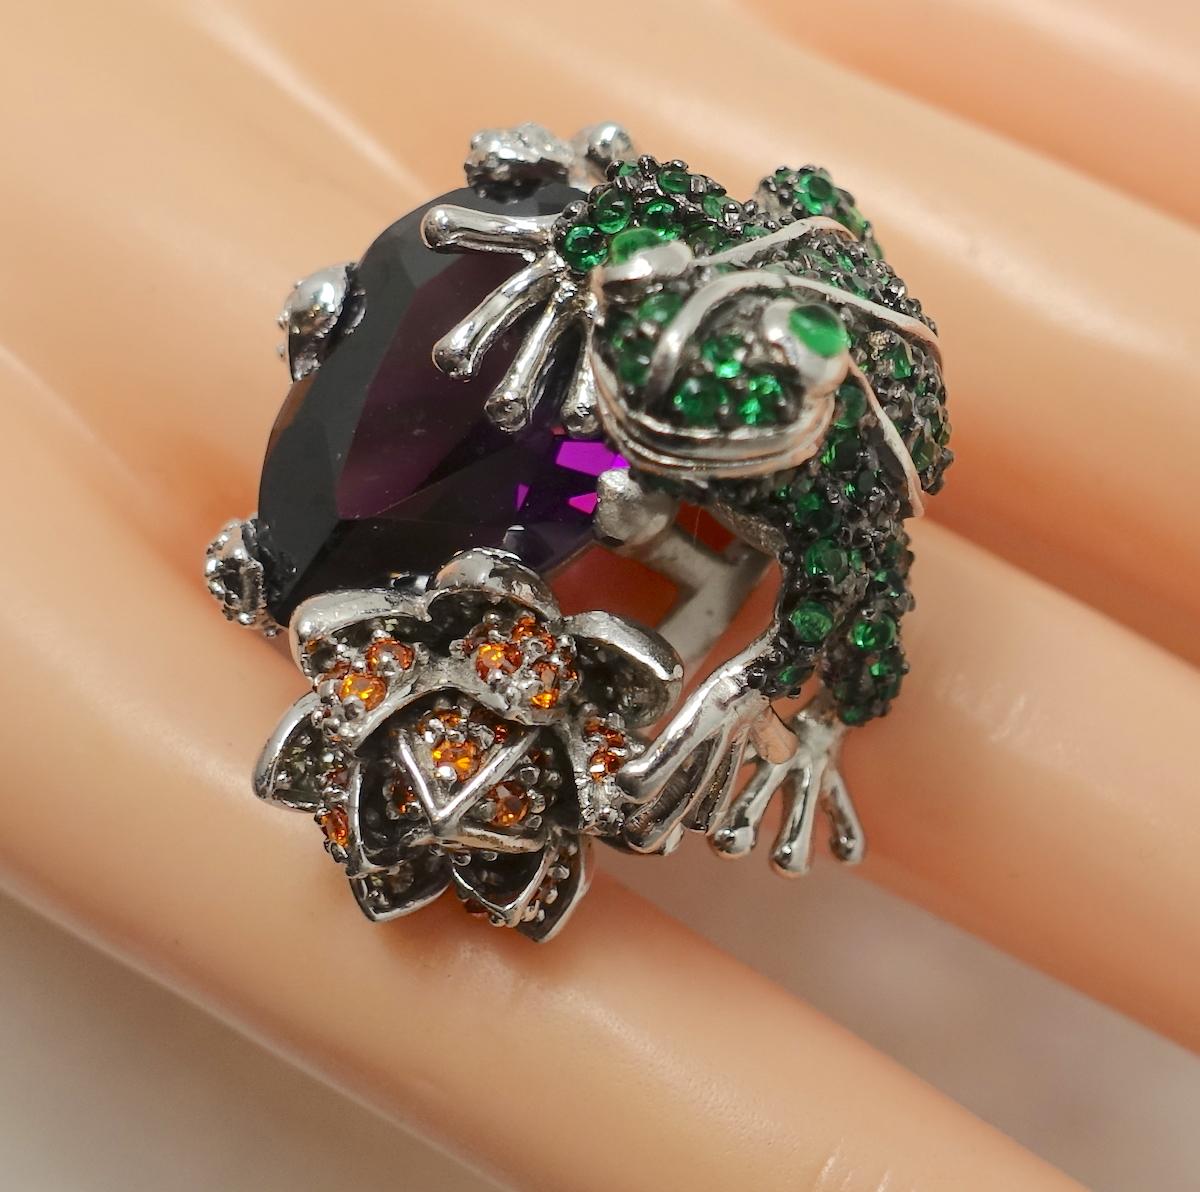 This vintage ring has an unusual frog design with large amethyst crystal and accents of green and red crystals in a sterling silver setting.  A size 7+, this ring measures 1-1/4” x 1”.